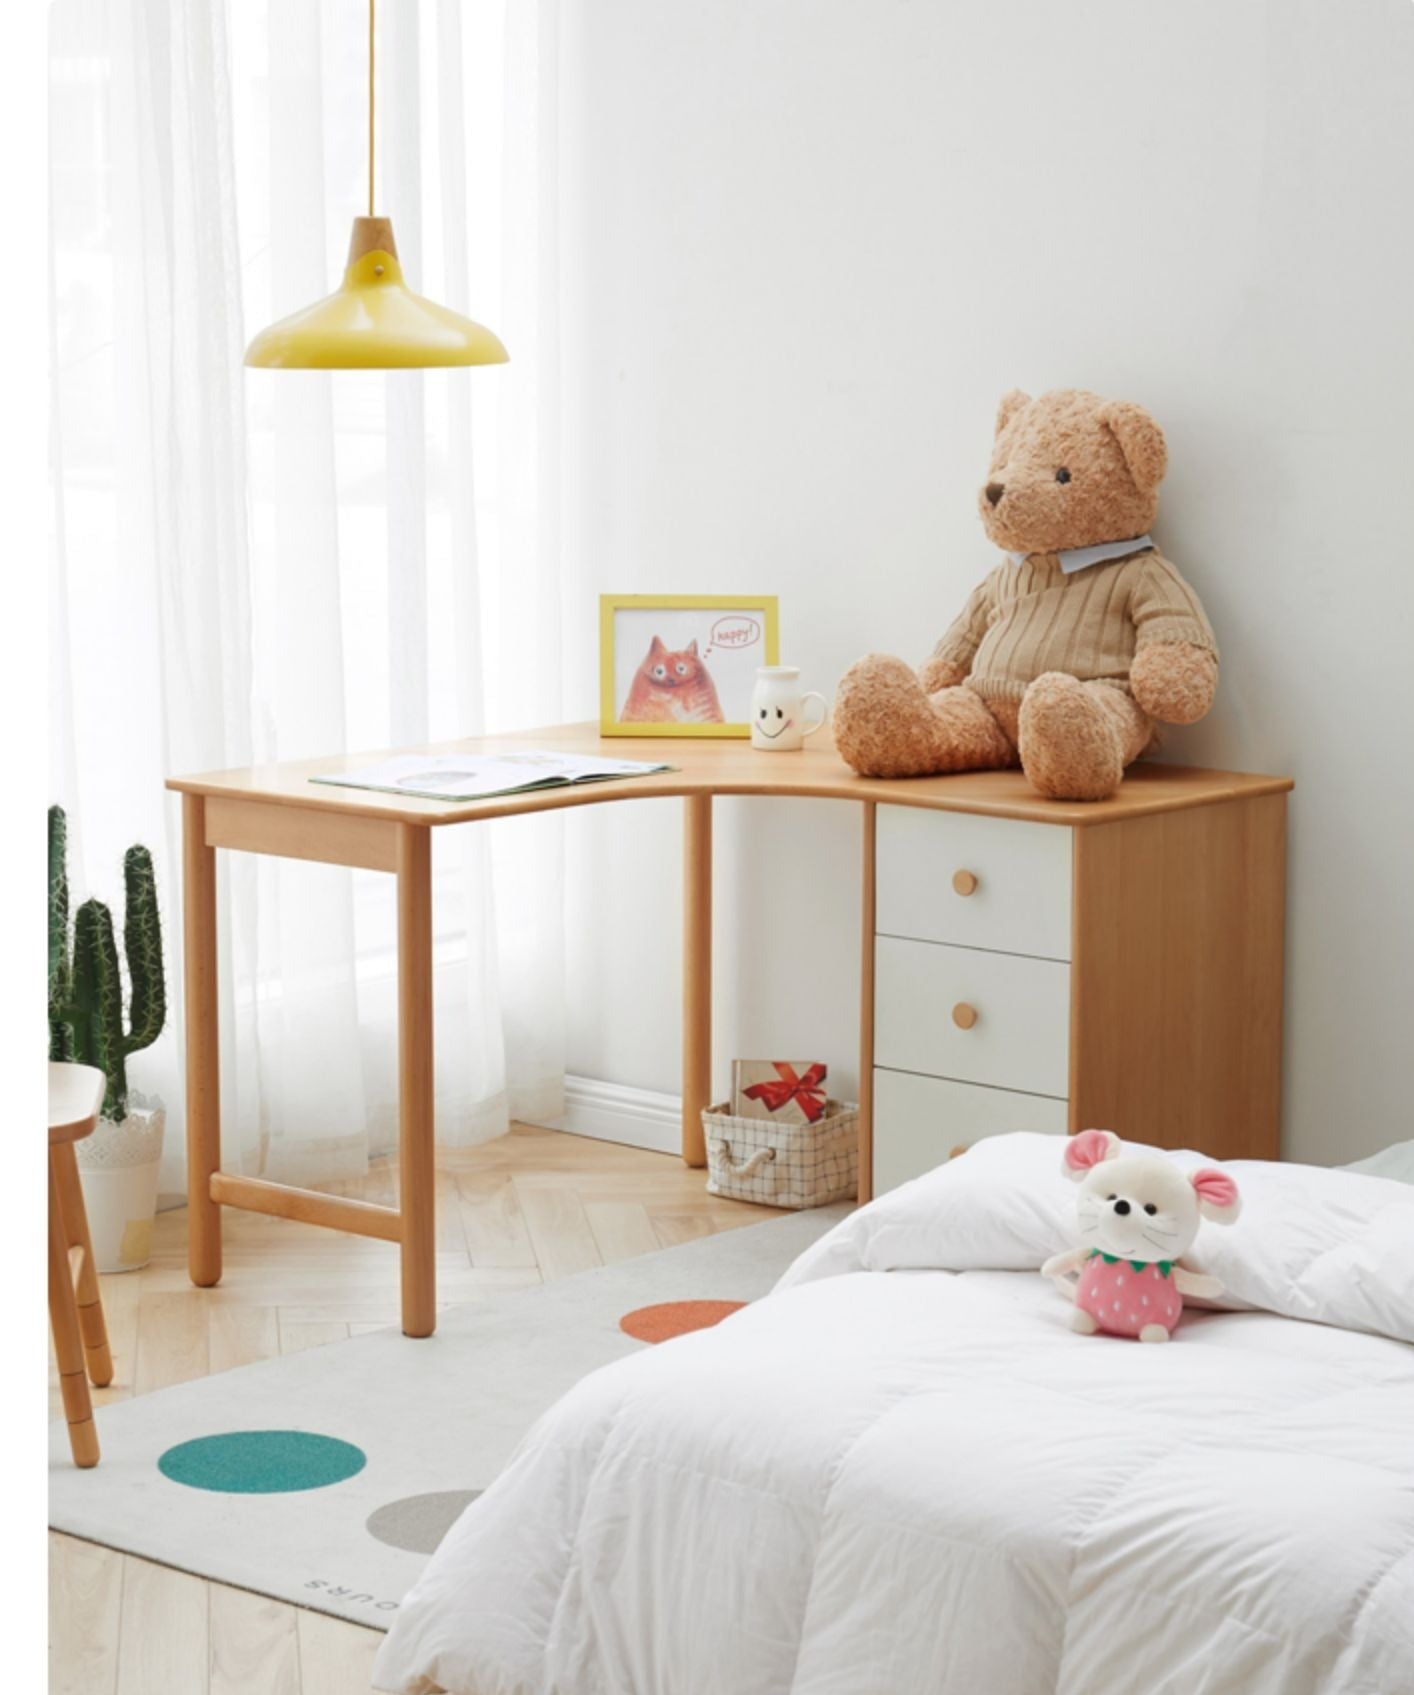 Combination children's desk, study table solid wood"